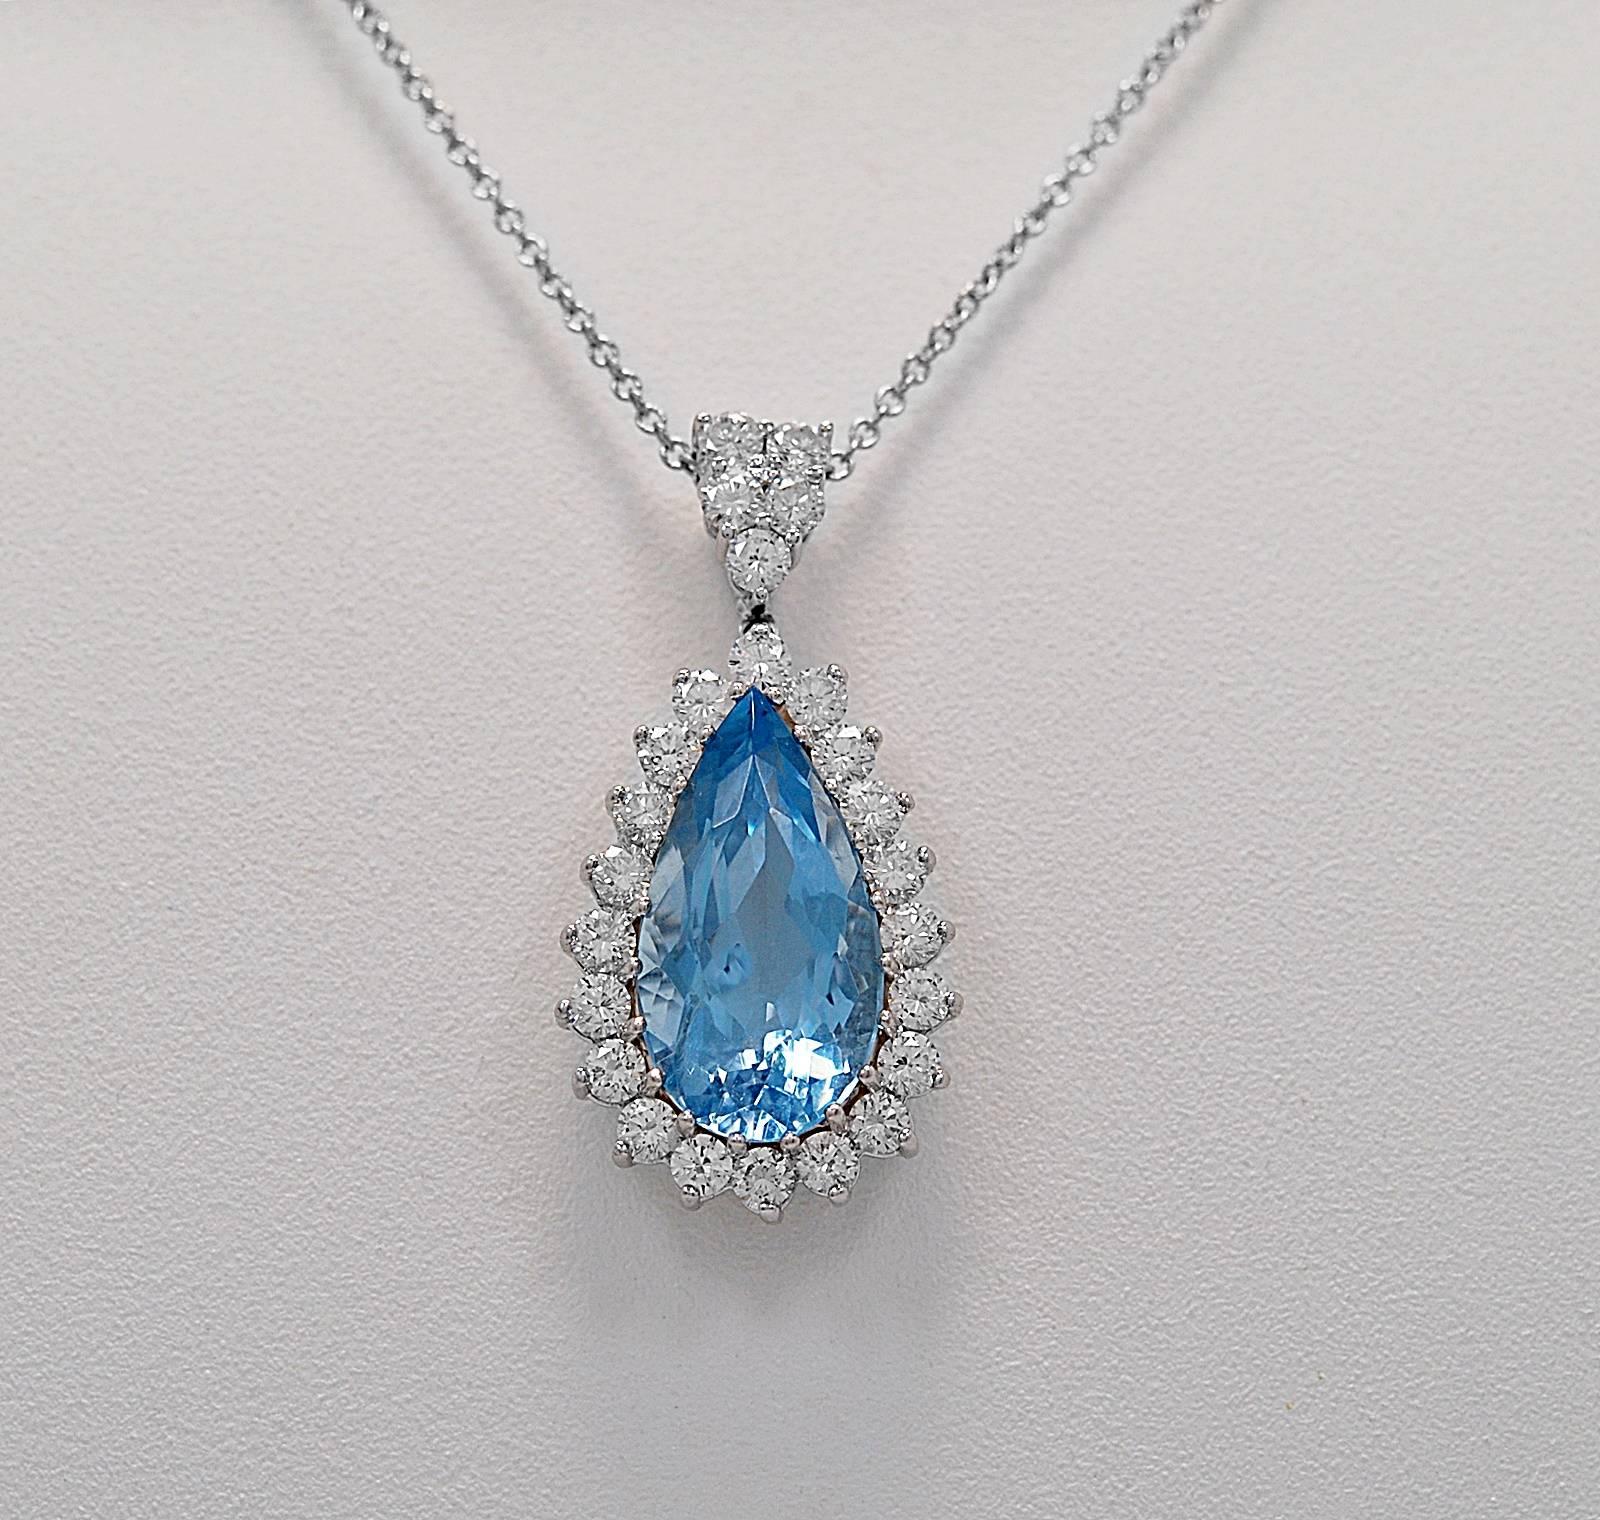 A stunning estate pendant featuring a 4.00ct. apx. pear shaped aquamarine with an accenting 1.00ct. apx. T.W. of round brilliant diamonds. The aquamarine is a deep rich sky blue surrounded by bright white diamonds. Exceptional quality and